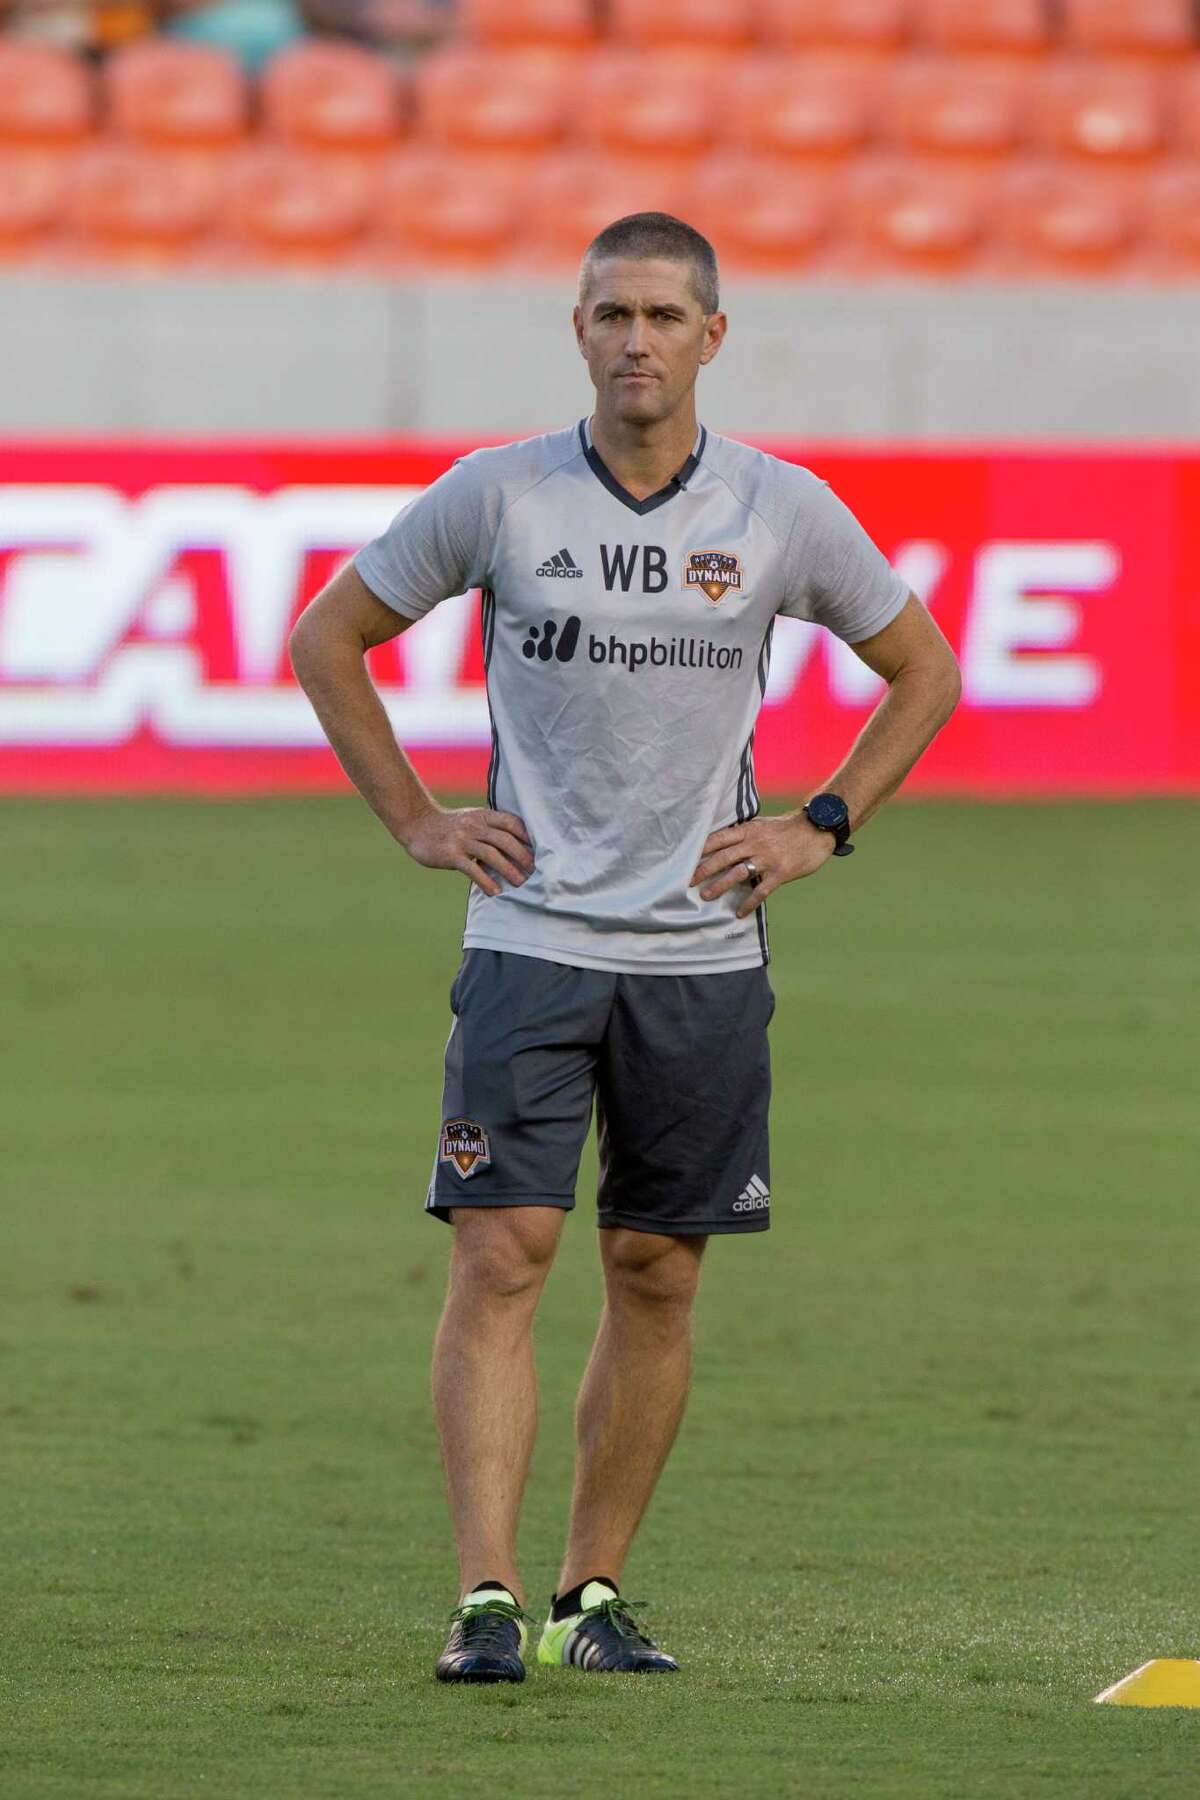 Houston Dynamo interim manager Wade Barrett on the field during practice before action between the between the Houston Dynamo and the San Jose Earthquakes during an MLS soccer game at BBVA Compass, Sunday, July 31, 2016, in Houston. (Juan DeLeon/for the Houston Chronicle)